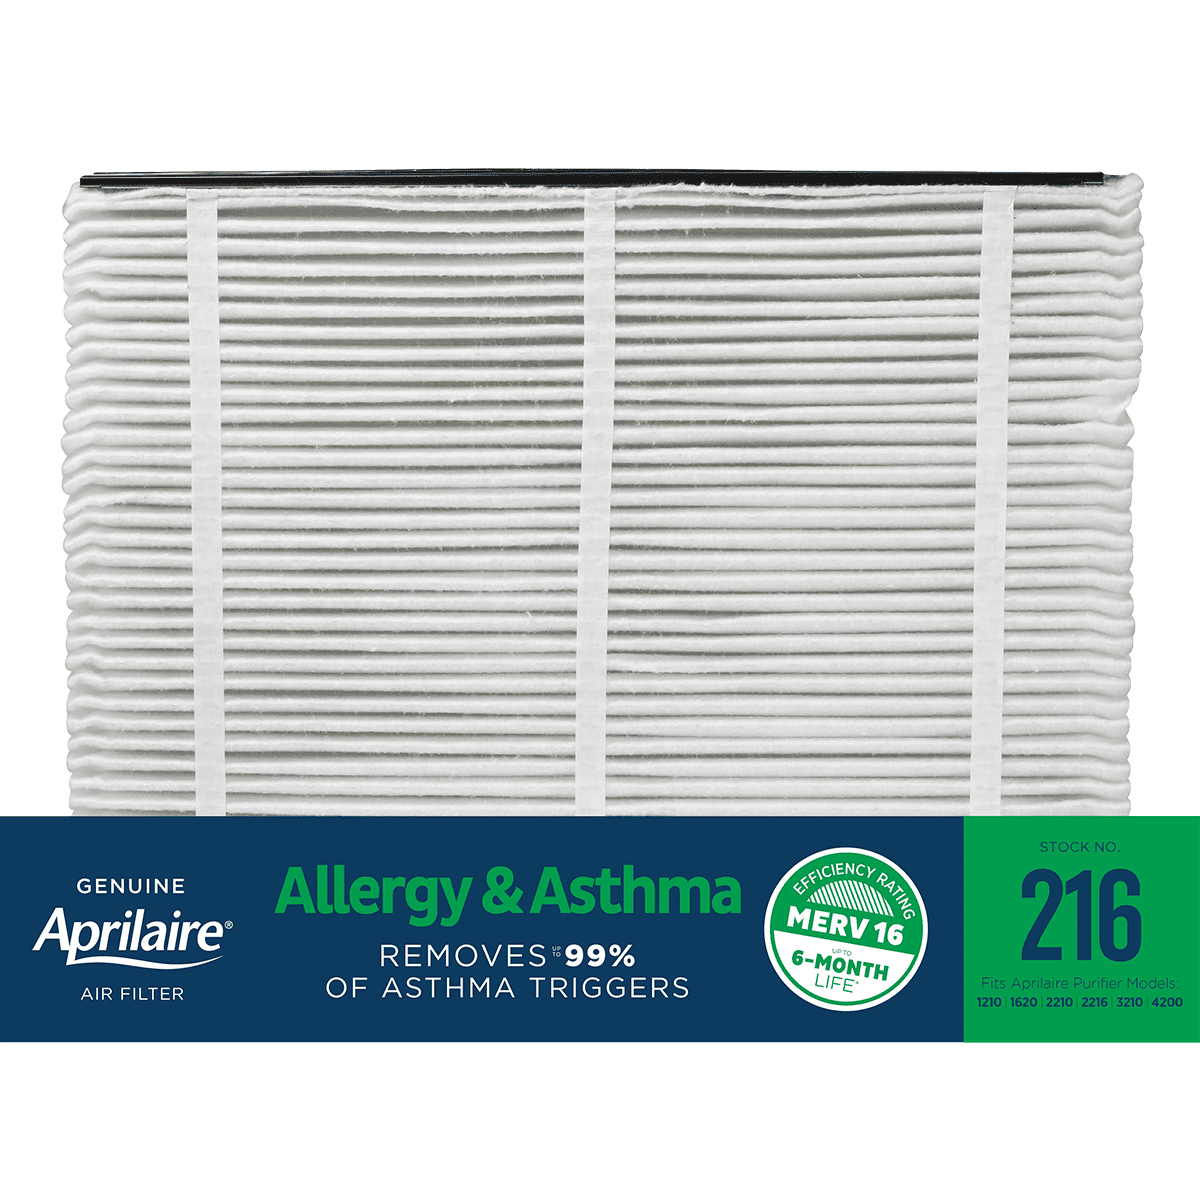 Aprilaire 216 MERV 16 Allergy & Asthma Replacement Filter (20x25) 2Pack